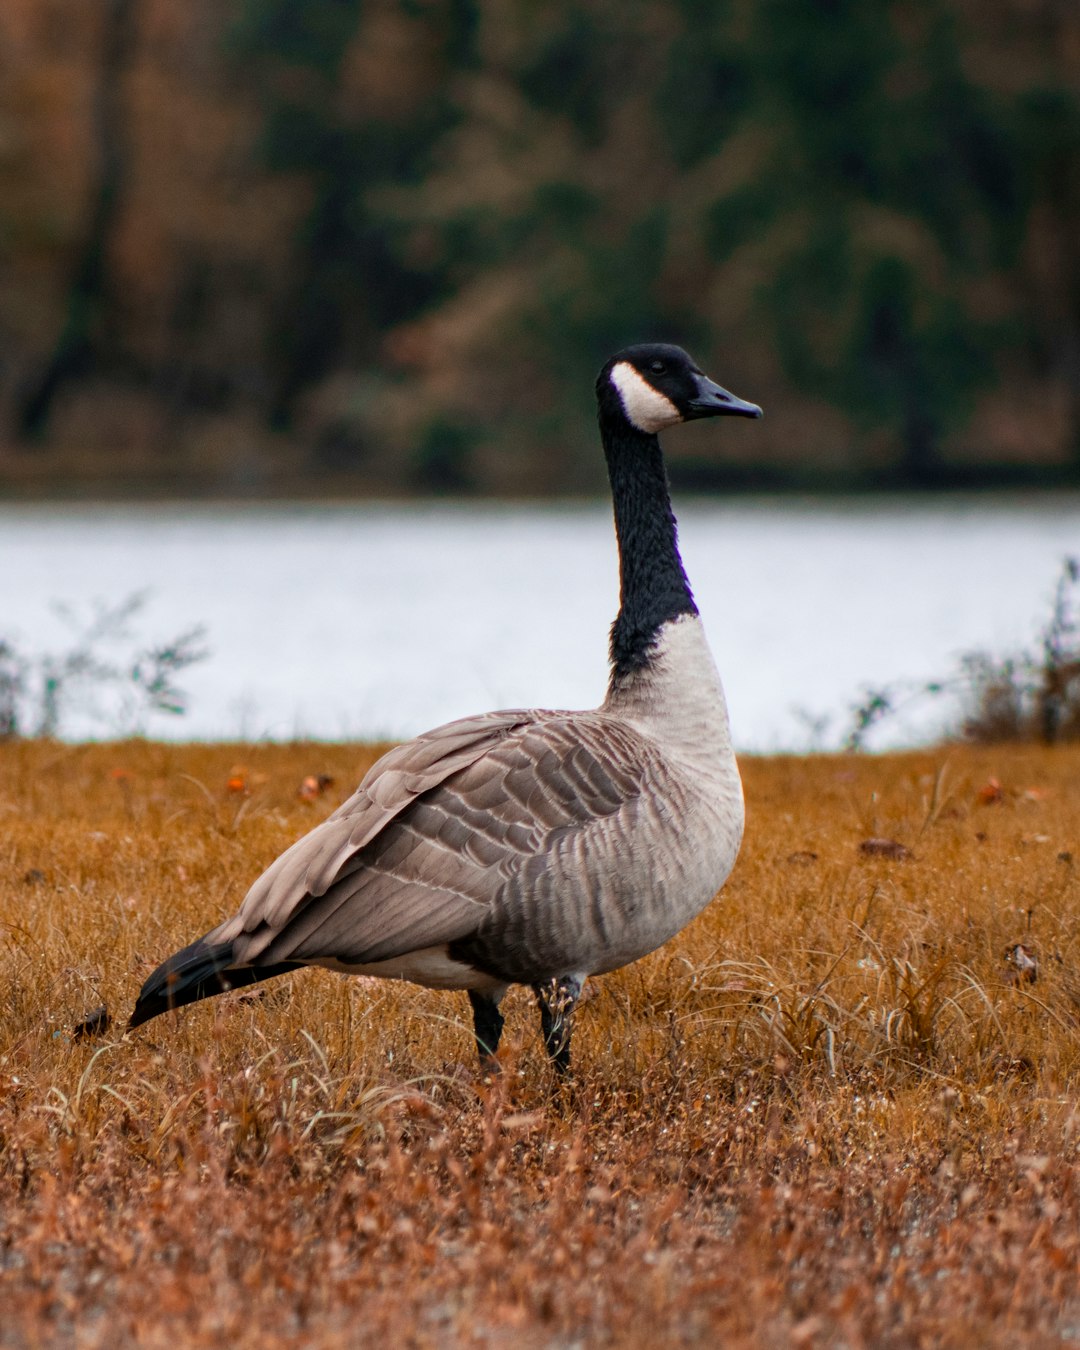  gray and black duck standing on grass field goose